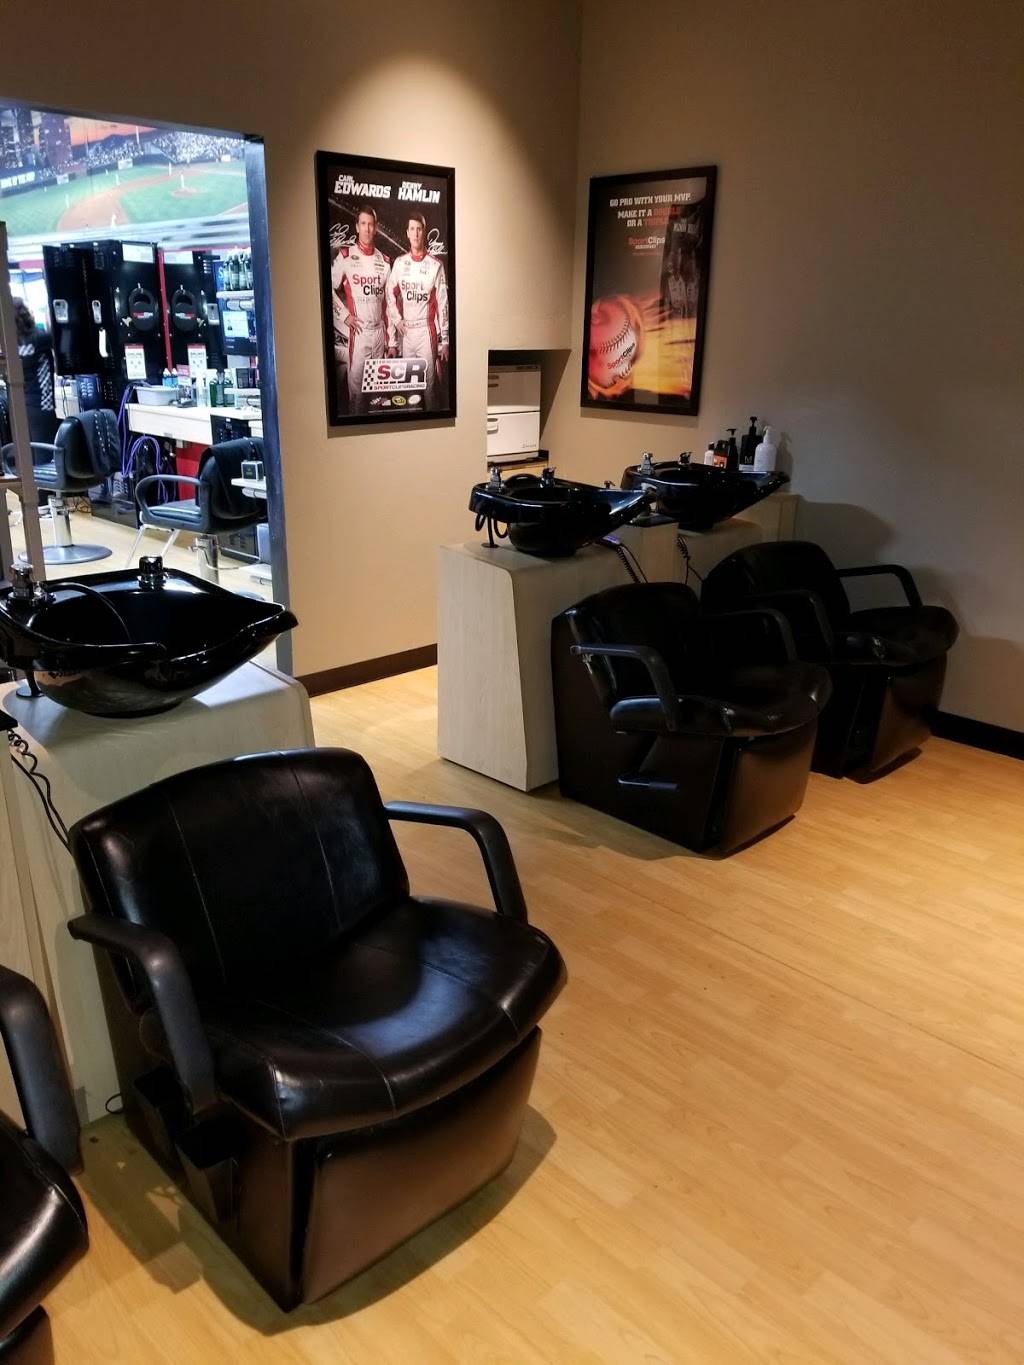 Sport Clips Haircuts of Bakersfield - Rosedale Village | 2681 Calloway Dr Suite #310, Bakersfield, CA 93312, USA | Phone: (661) 587-2547